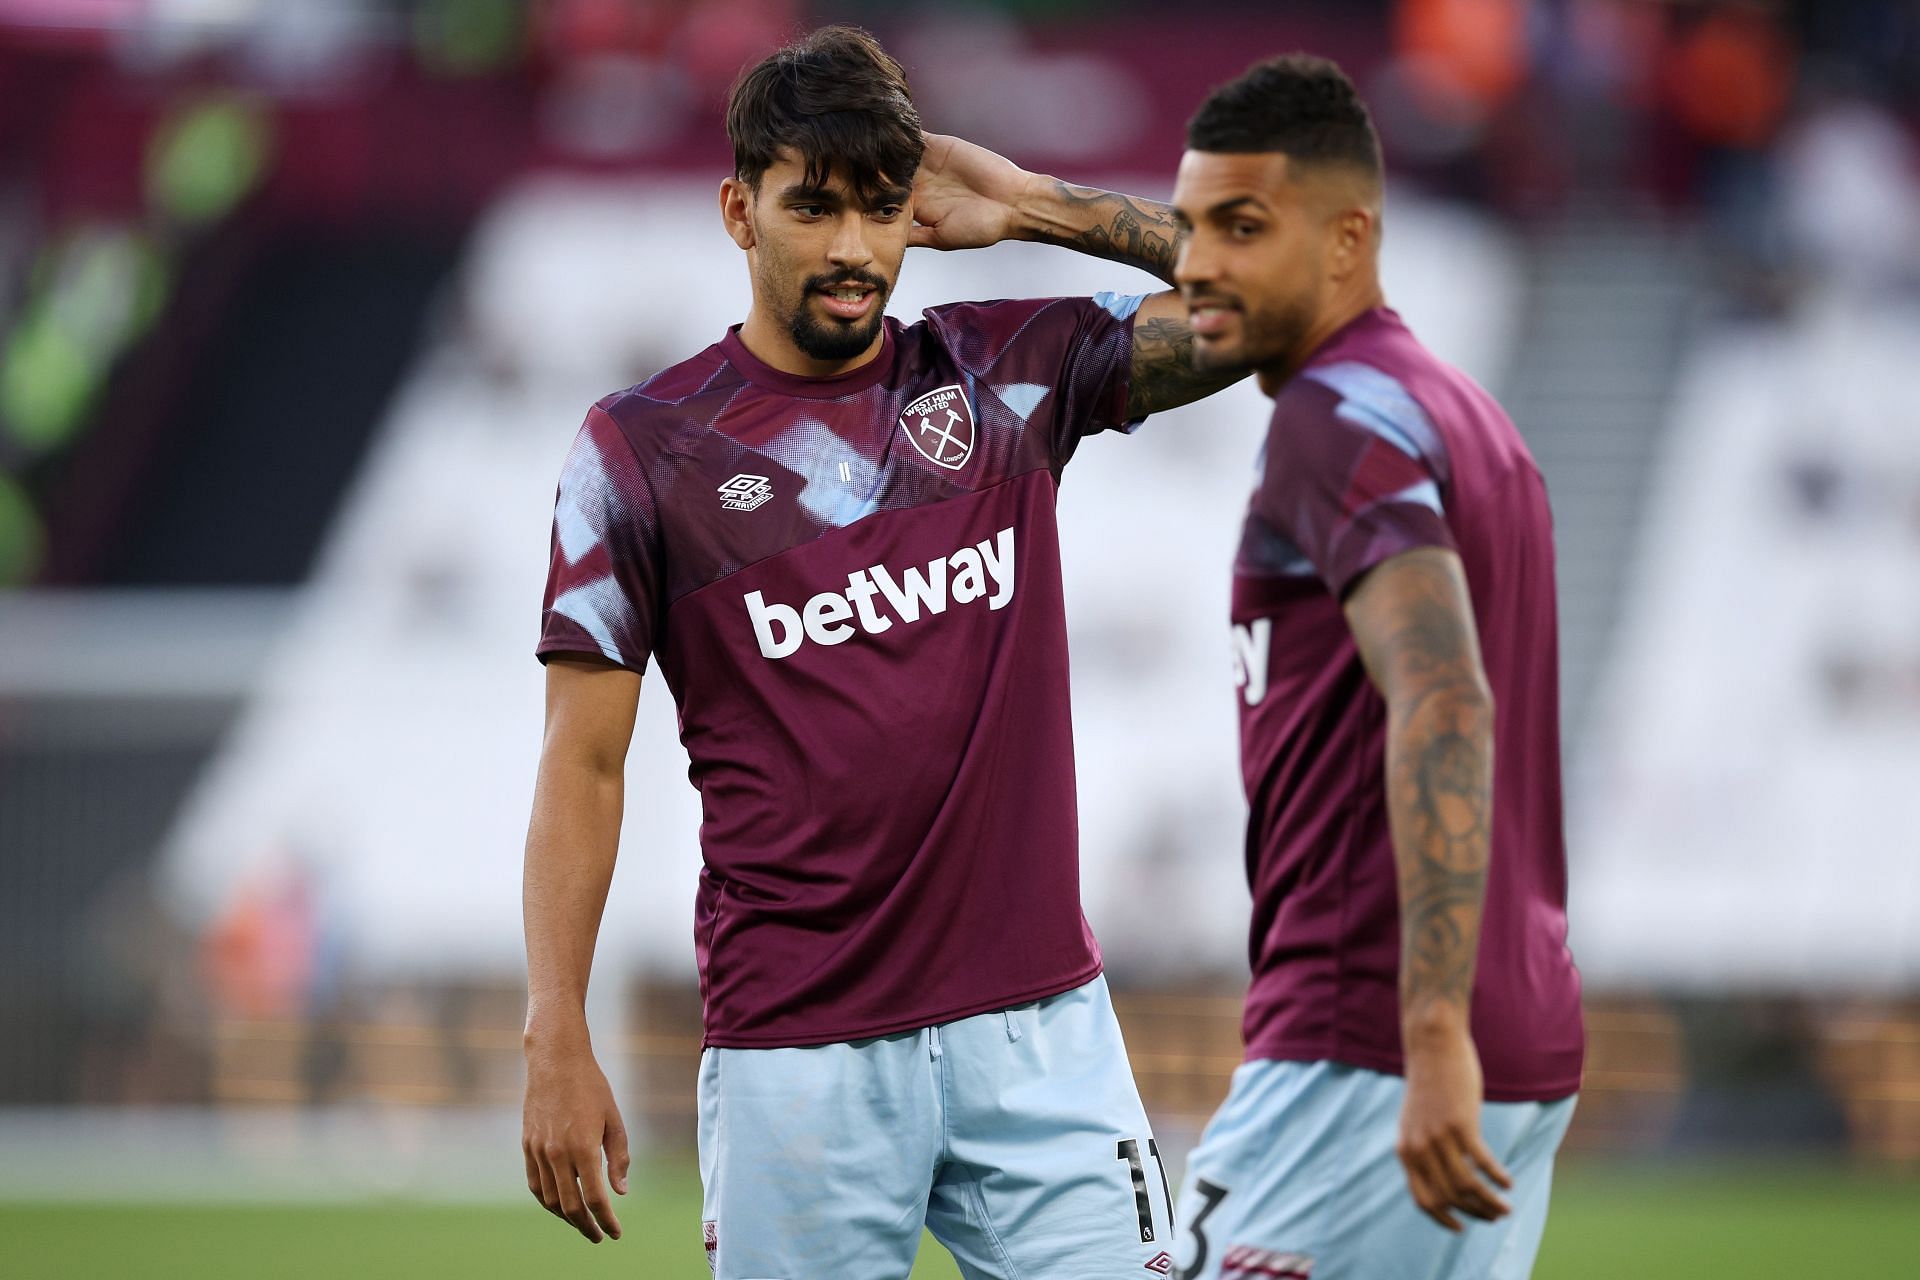 West Ham United signed Lucas Paqueta from Lyon